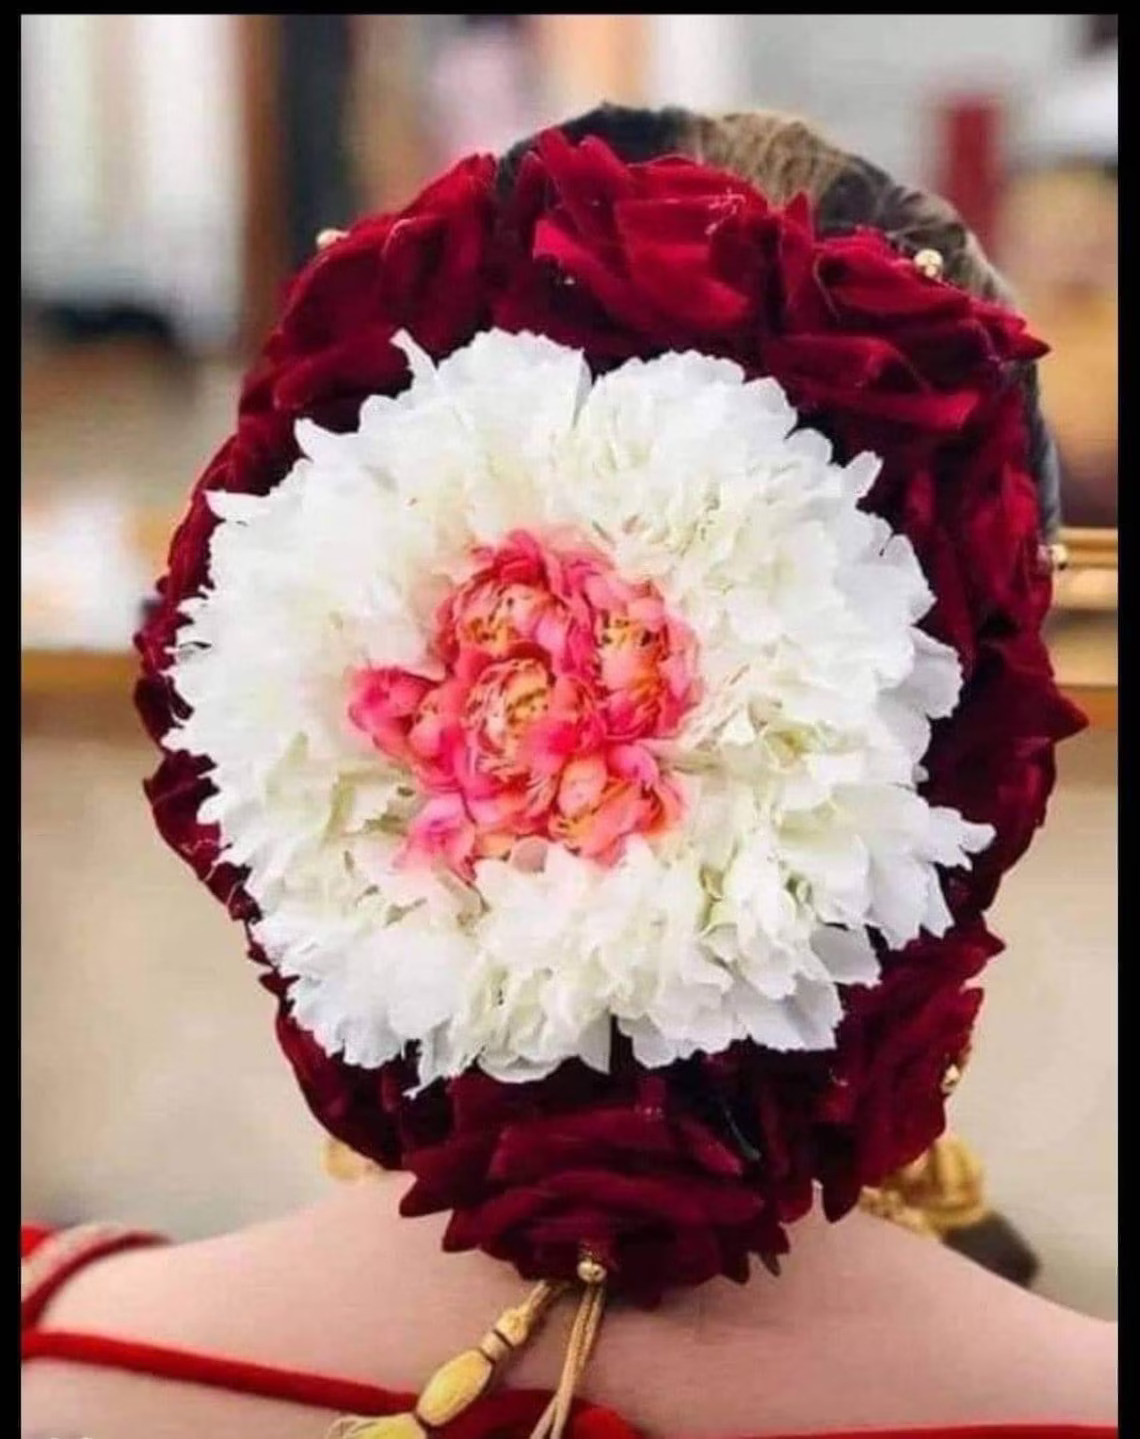 35+ South Indian Bridal Bun Hairstyles with Flowers | Bridal hair  decorations, Bridal hair buns, Flowers in hair